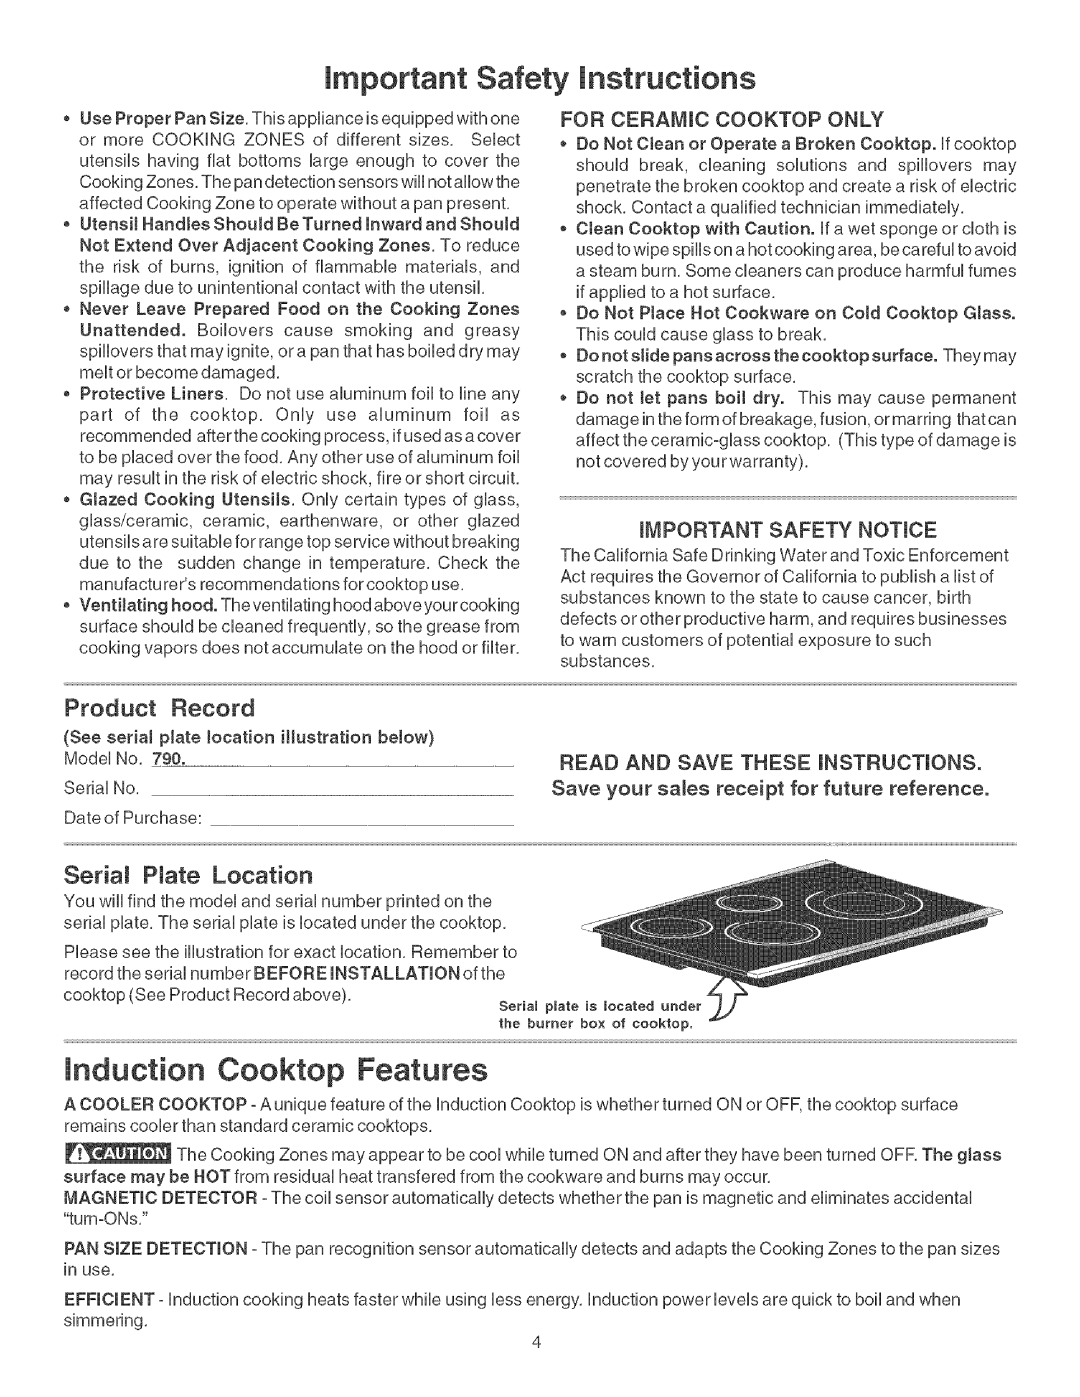 Kenmore 790.428 manual important Safety instructions, induction Cooktop Features, For Ceramic Cooktop Only 